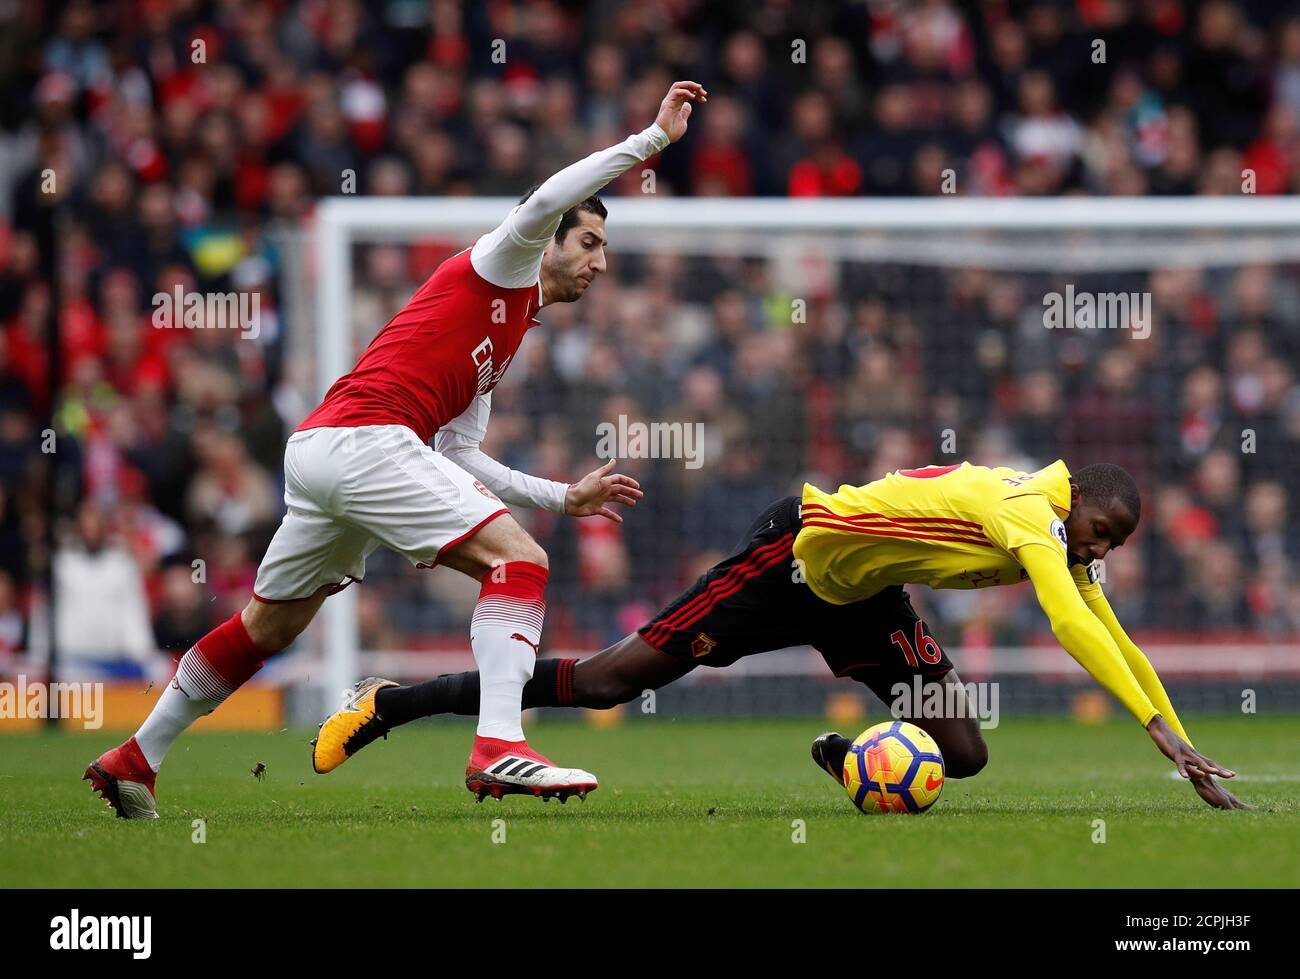 Soccer Football - Premier League - Arsenal vs Watford - Emirates Stadium, London, Britain - March 11, 2018   Arsenal's Henrikh Mkhitaryan in action with Watford's Abdoulaye Doucoure          REUTERS/Eddie Keogh    EDITORIAL USE ONLY. No use with unauthorized audio, video, data, fixture lists, club/league logos or "live" services. Online in-match use limited to 75 images, no video emulation. No use in betting, games or single club/league/player publications.  Please contact your account representative for further details. Stock Photo